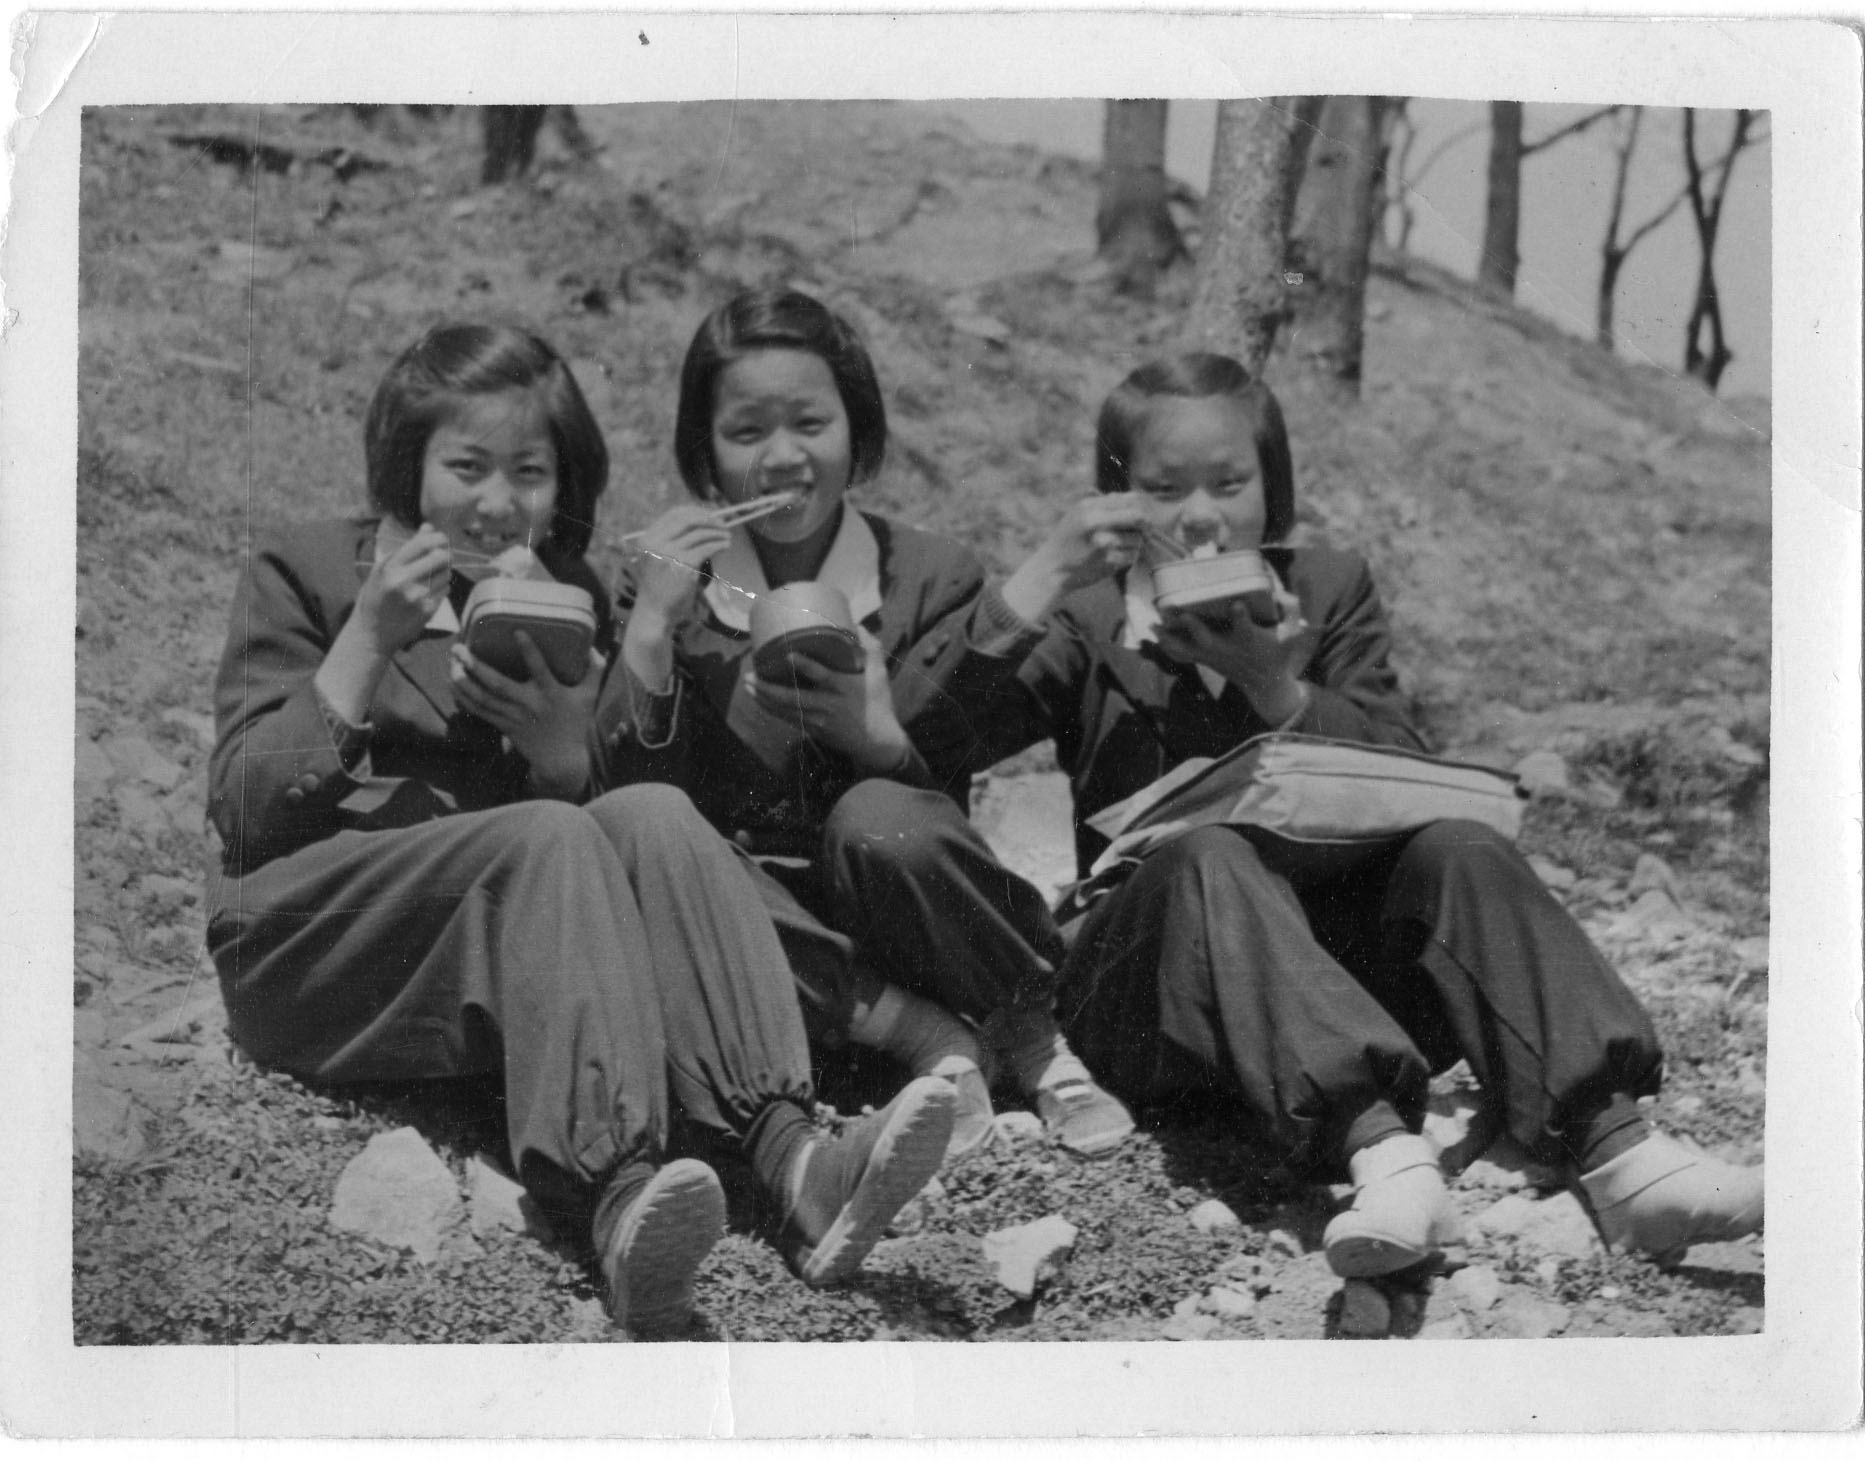 With her high school friends in Pusan during the Korean War